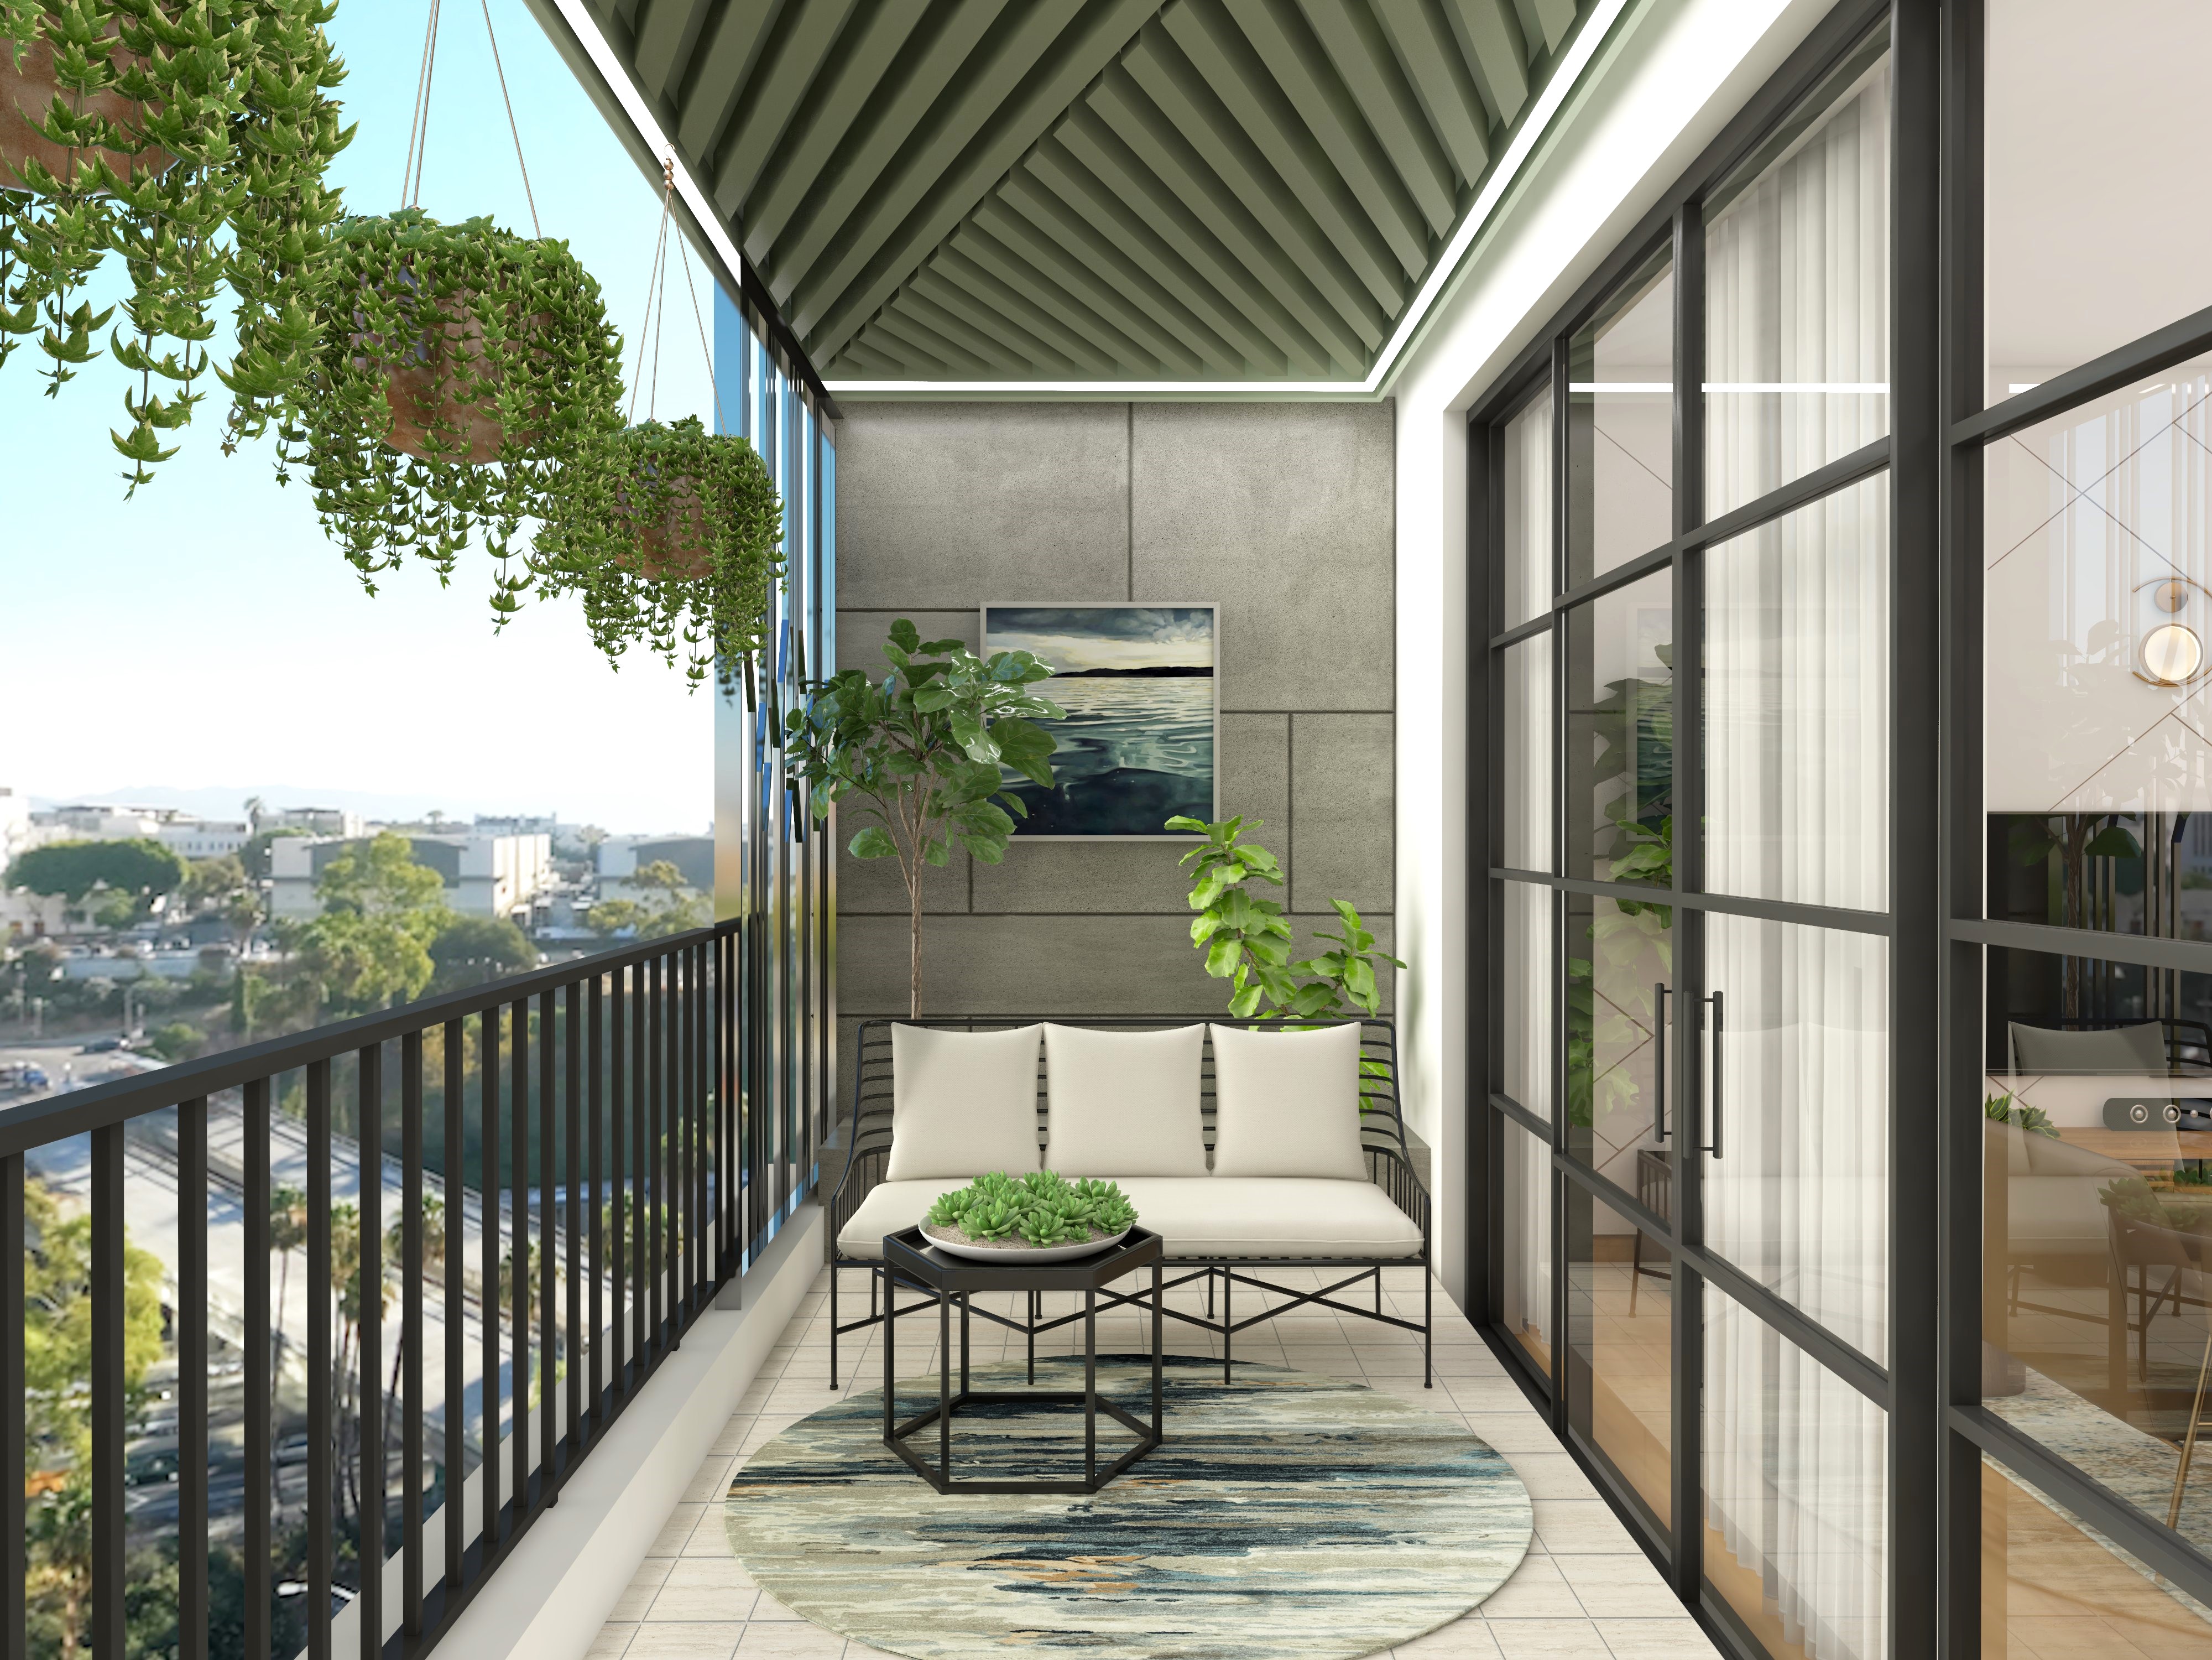 Balcony design with hanging planters and grey wall tiles - Beautiful Homes